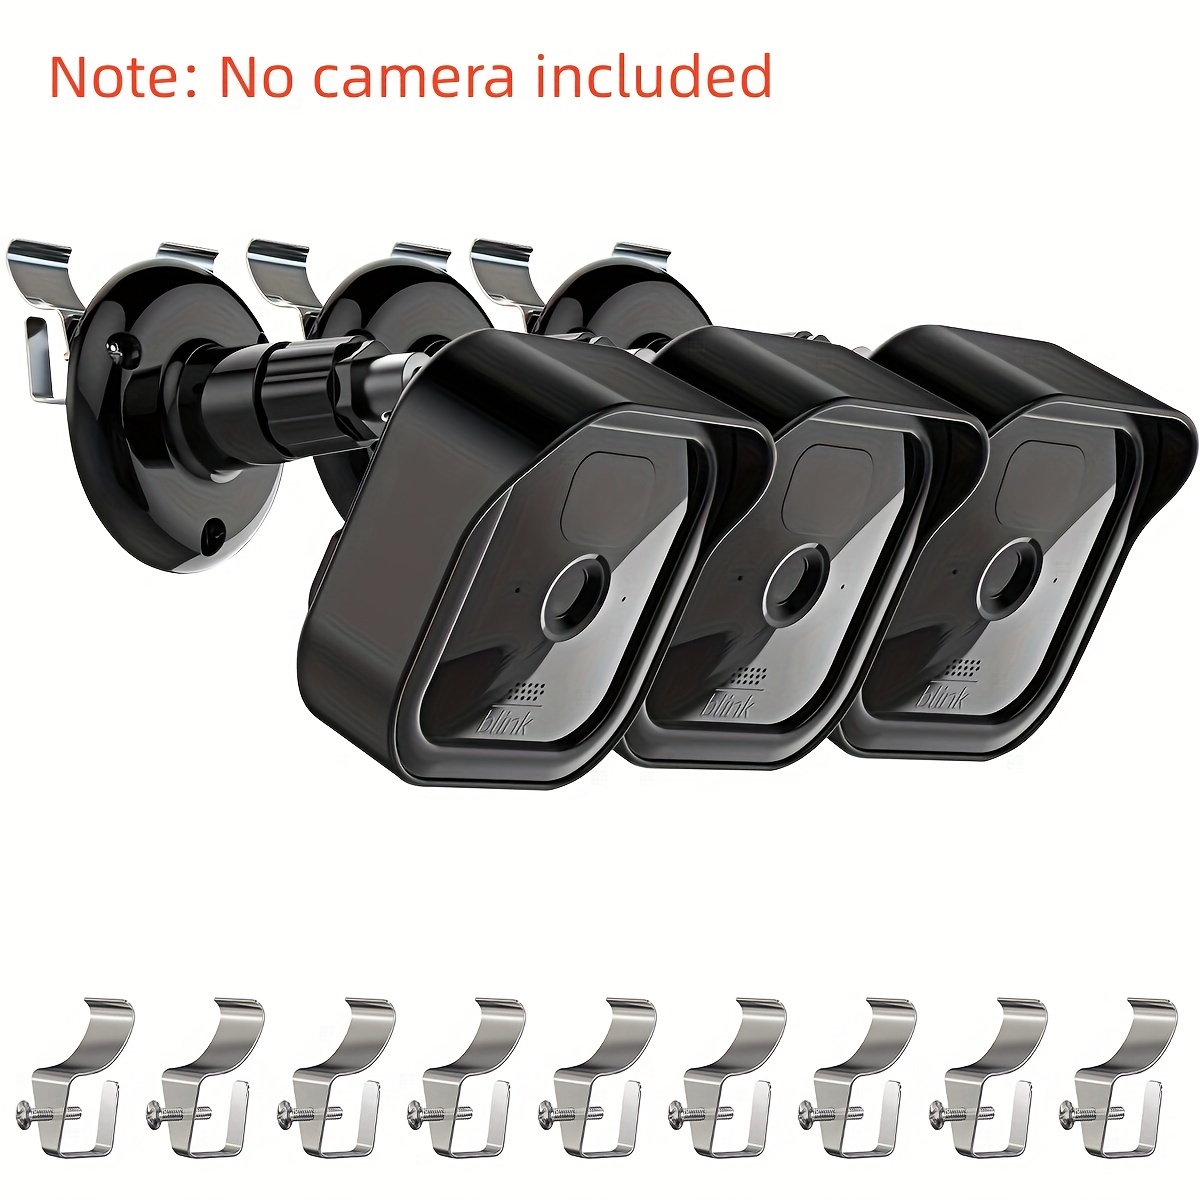 Blink Outdoor (3rd gen) Camera Wall Mount Bracket, 5 Pack Plastic  Protective Housing and 360° Adjustable Mount with Blink Sync Module 2 Mount  for